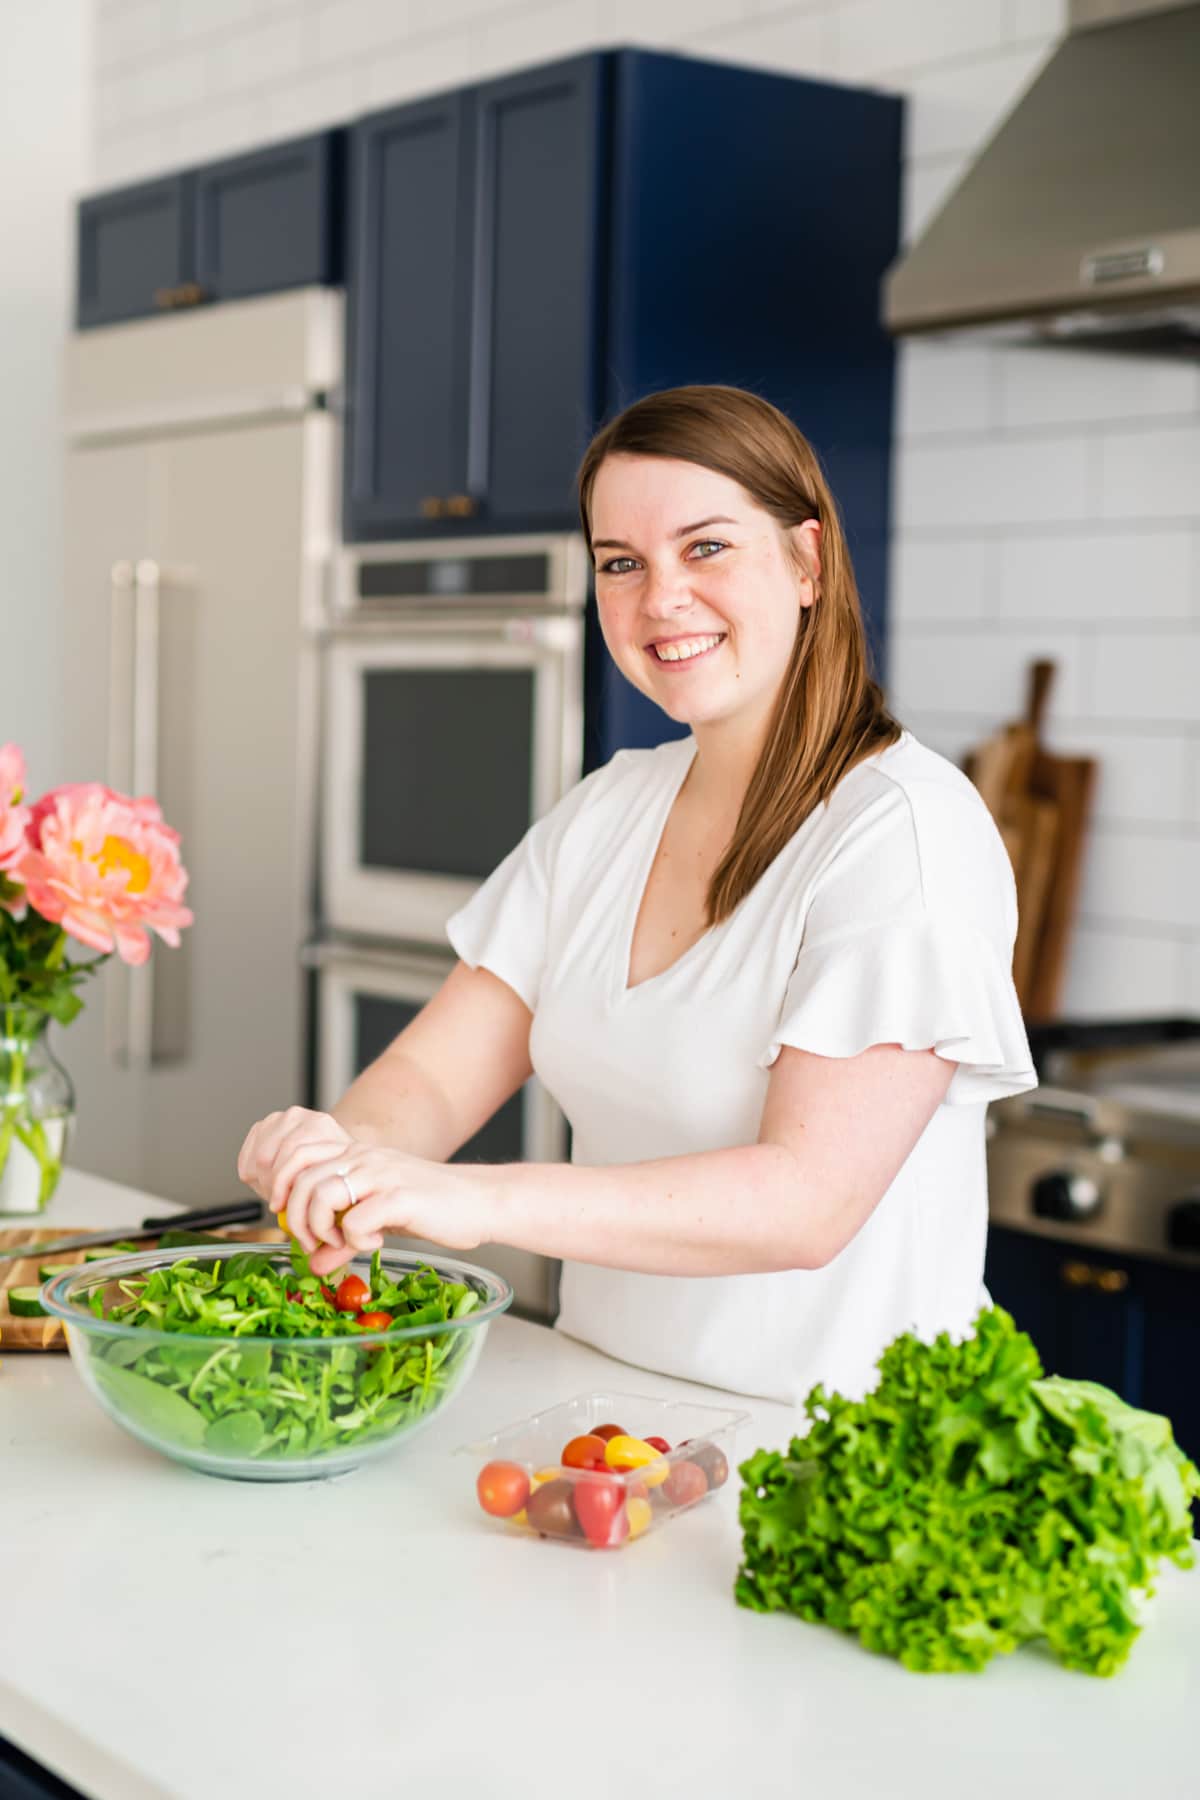 A woman in a white shirt placing tomatoes into a salad.